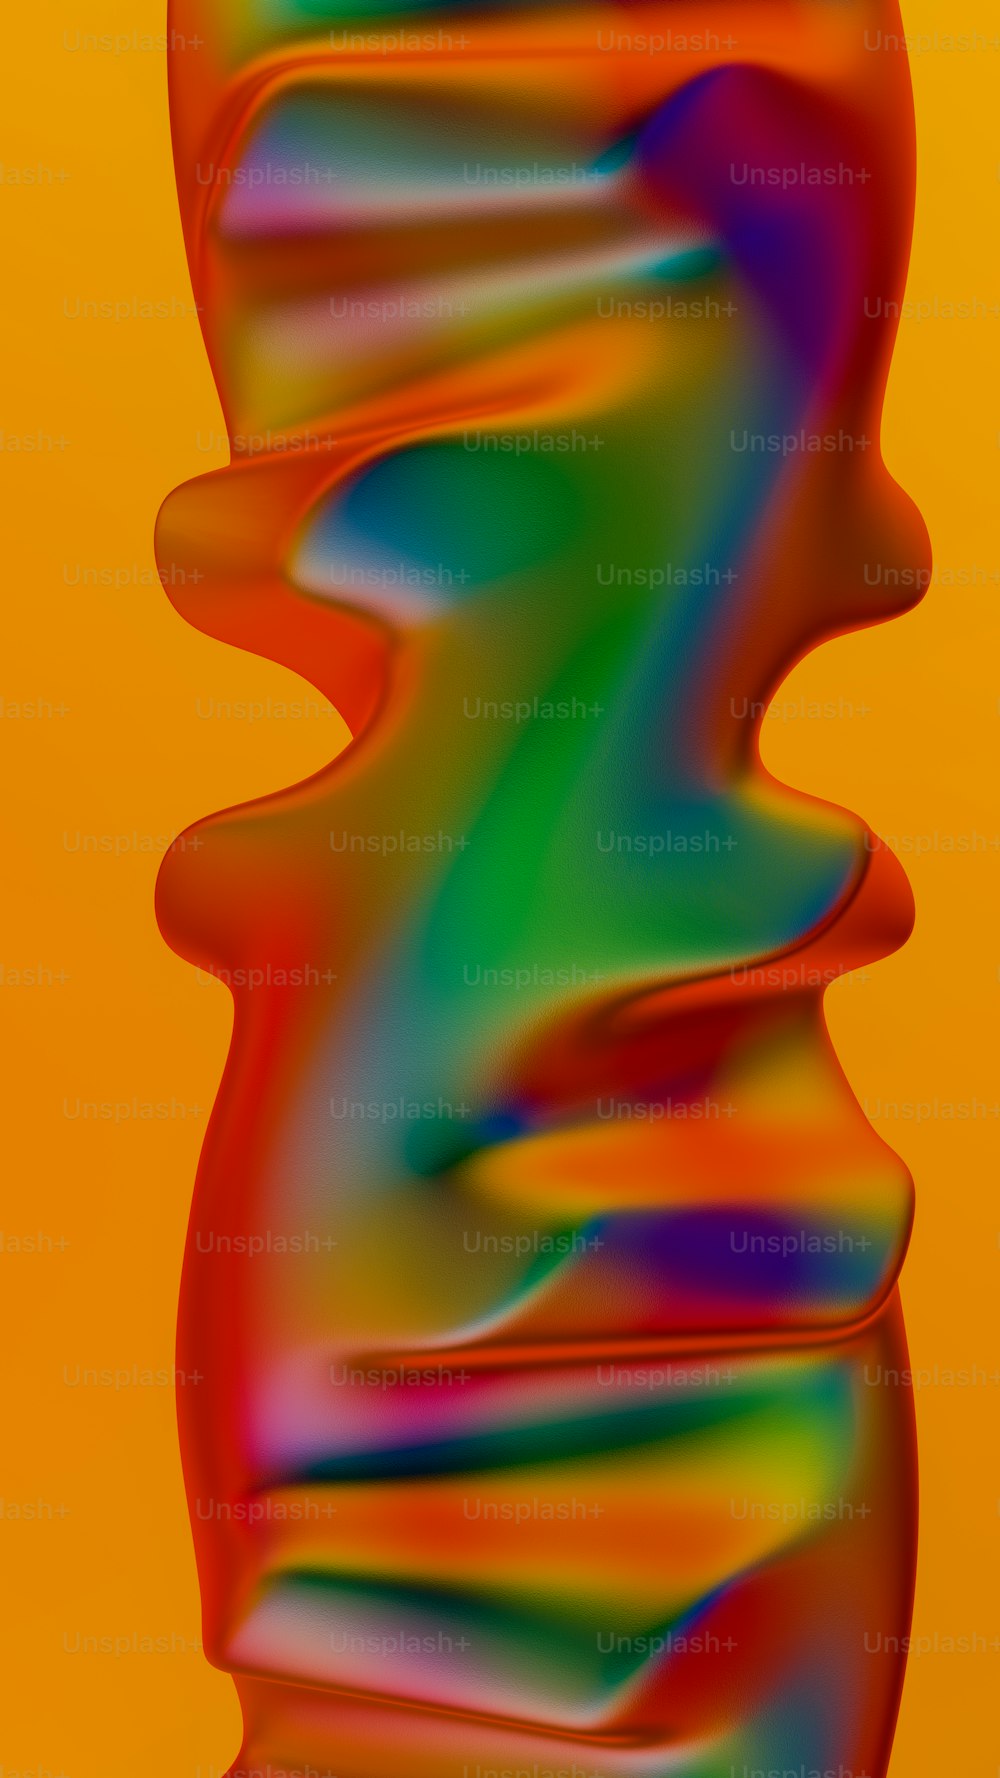 a multicolored image of a curved object on a yellow background